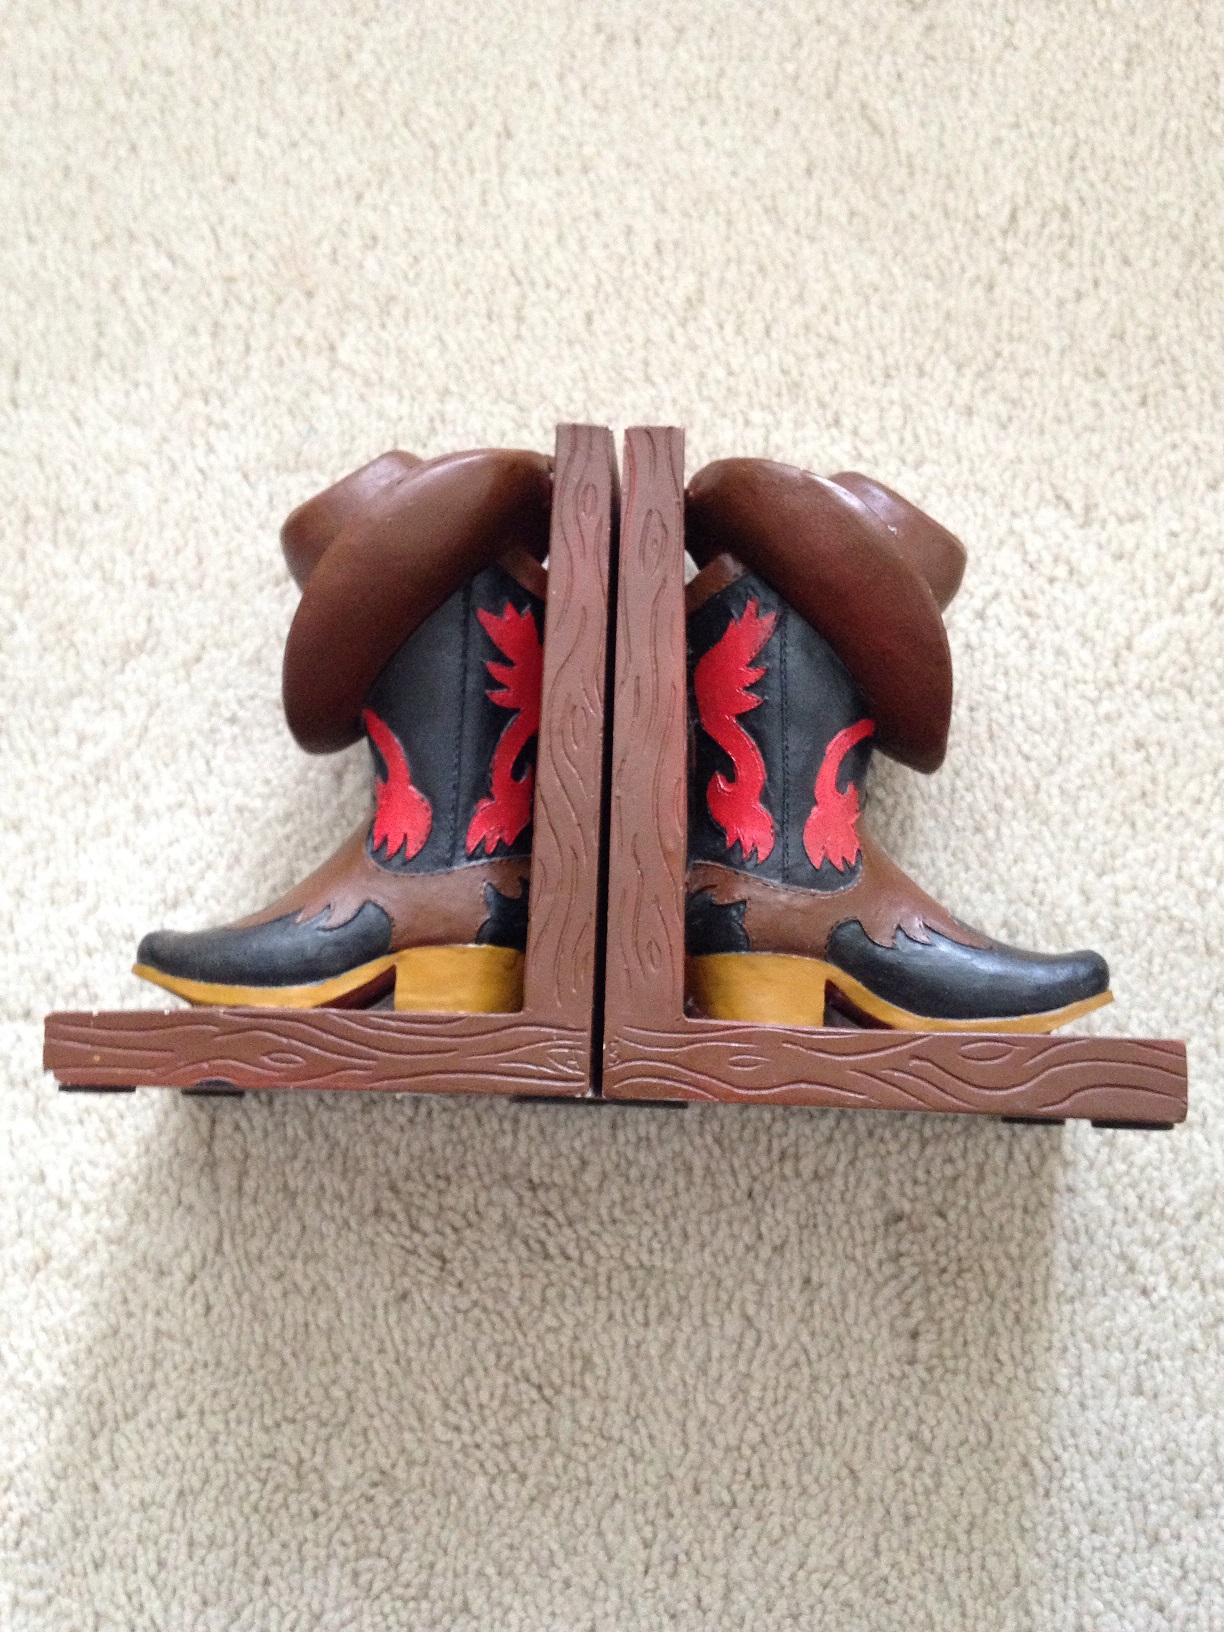 Used   Melannco  Lot of 2 Texan Cowboy Boot Bookends